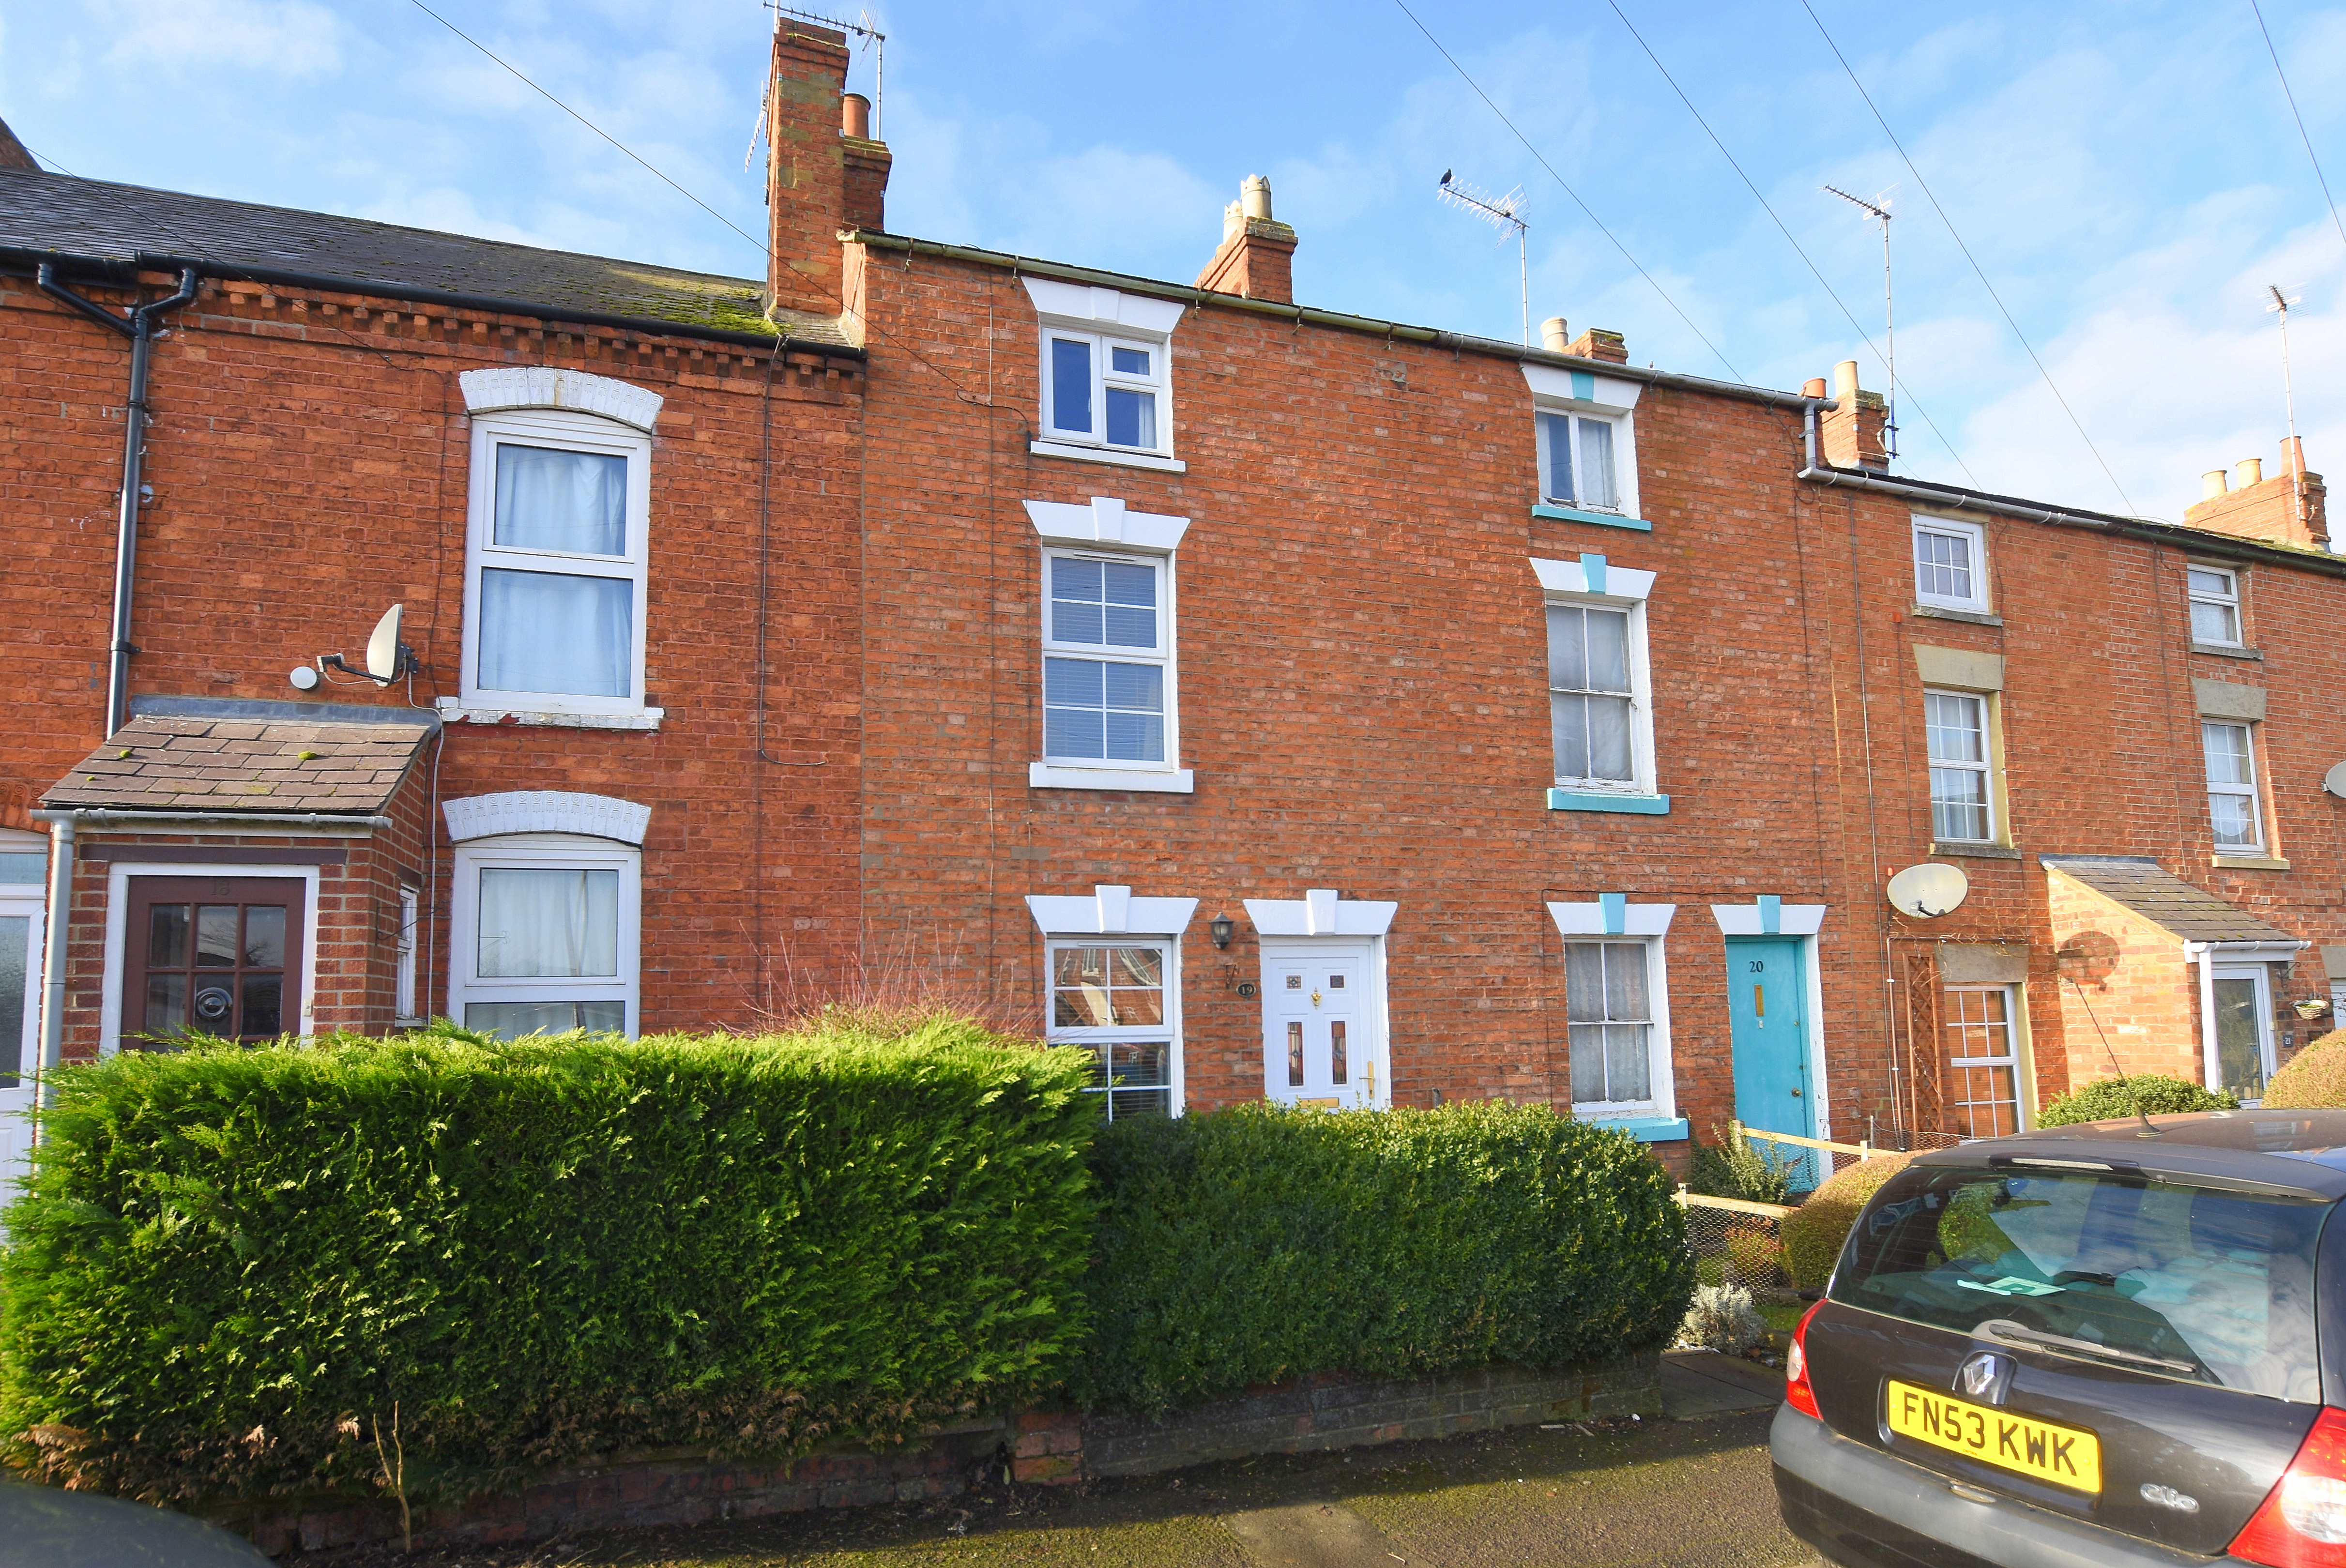 3 bed  for sale in East Street, Banbury  - Property Image 1